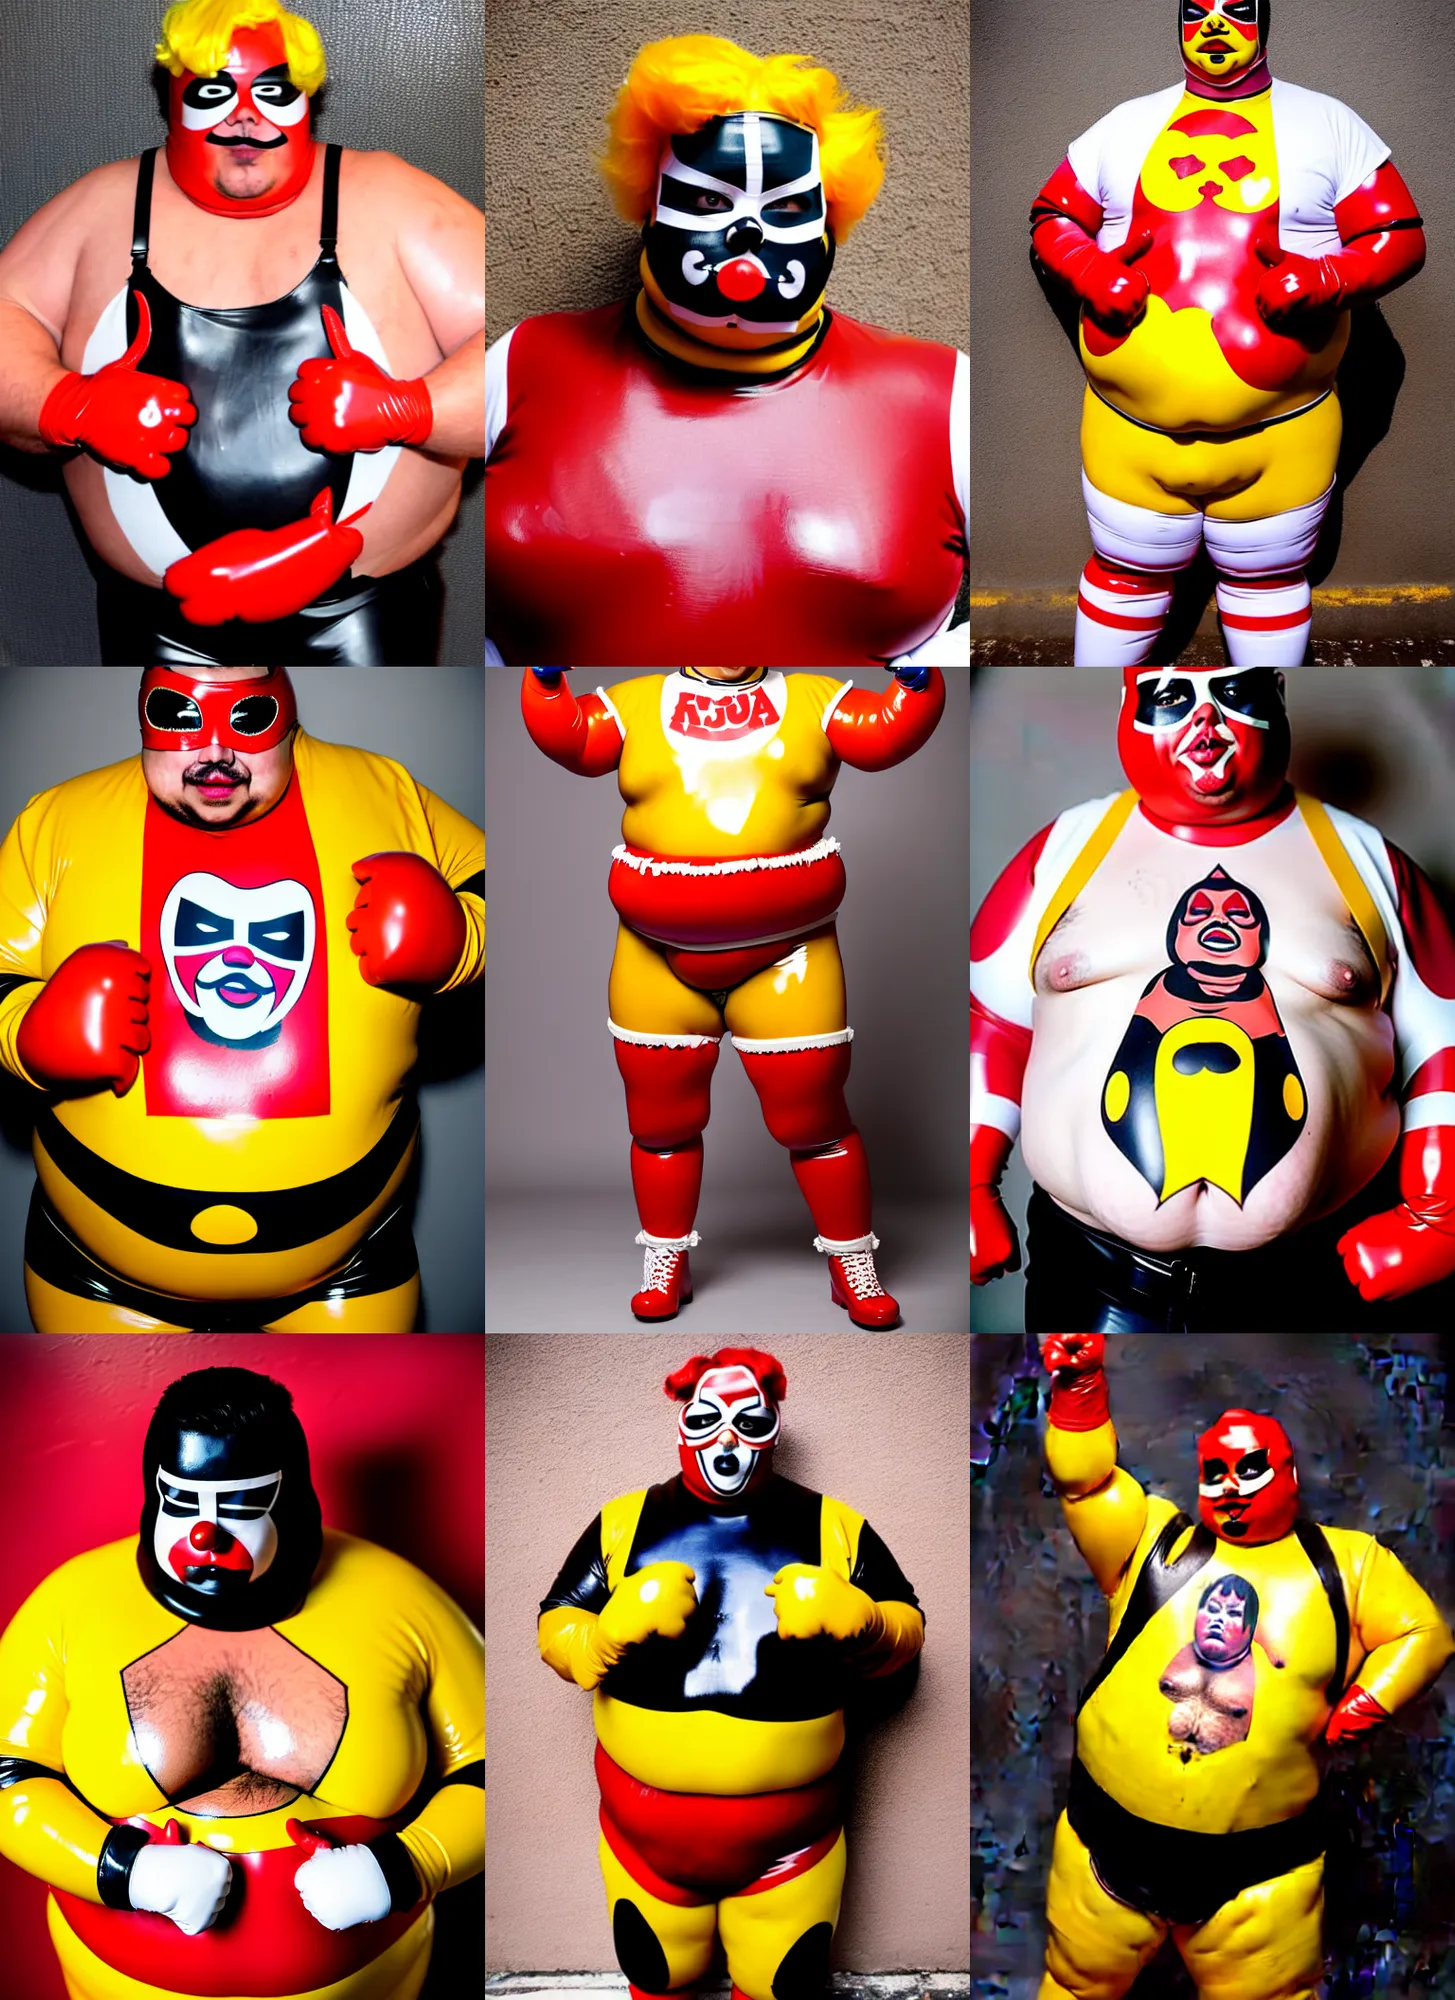 Prompt: portrait of a very chubby looking Lucha libre dressed in rubber latex costume with a hamburger motif tattoo on the bare hairy chest, red and white color latex sleeves, yellow latex gloves, red Ronald McDonald hair